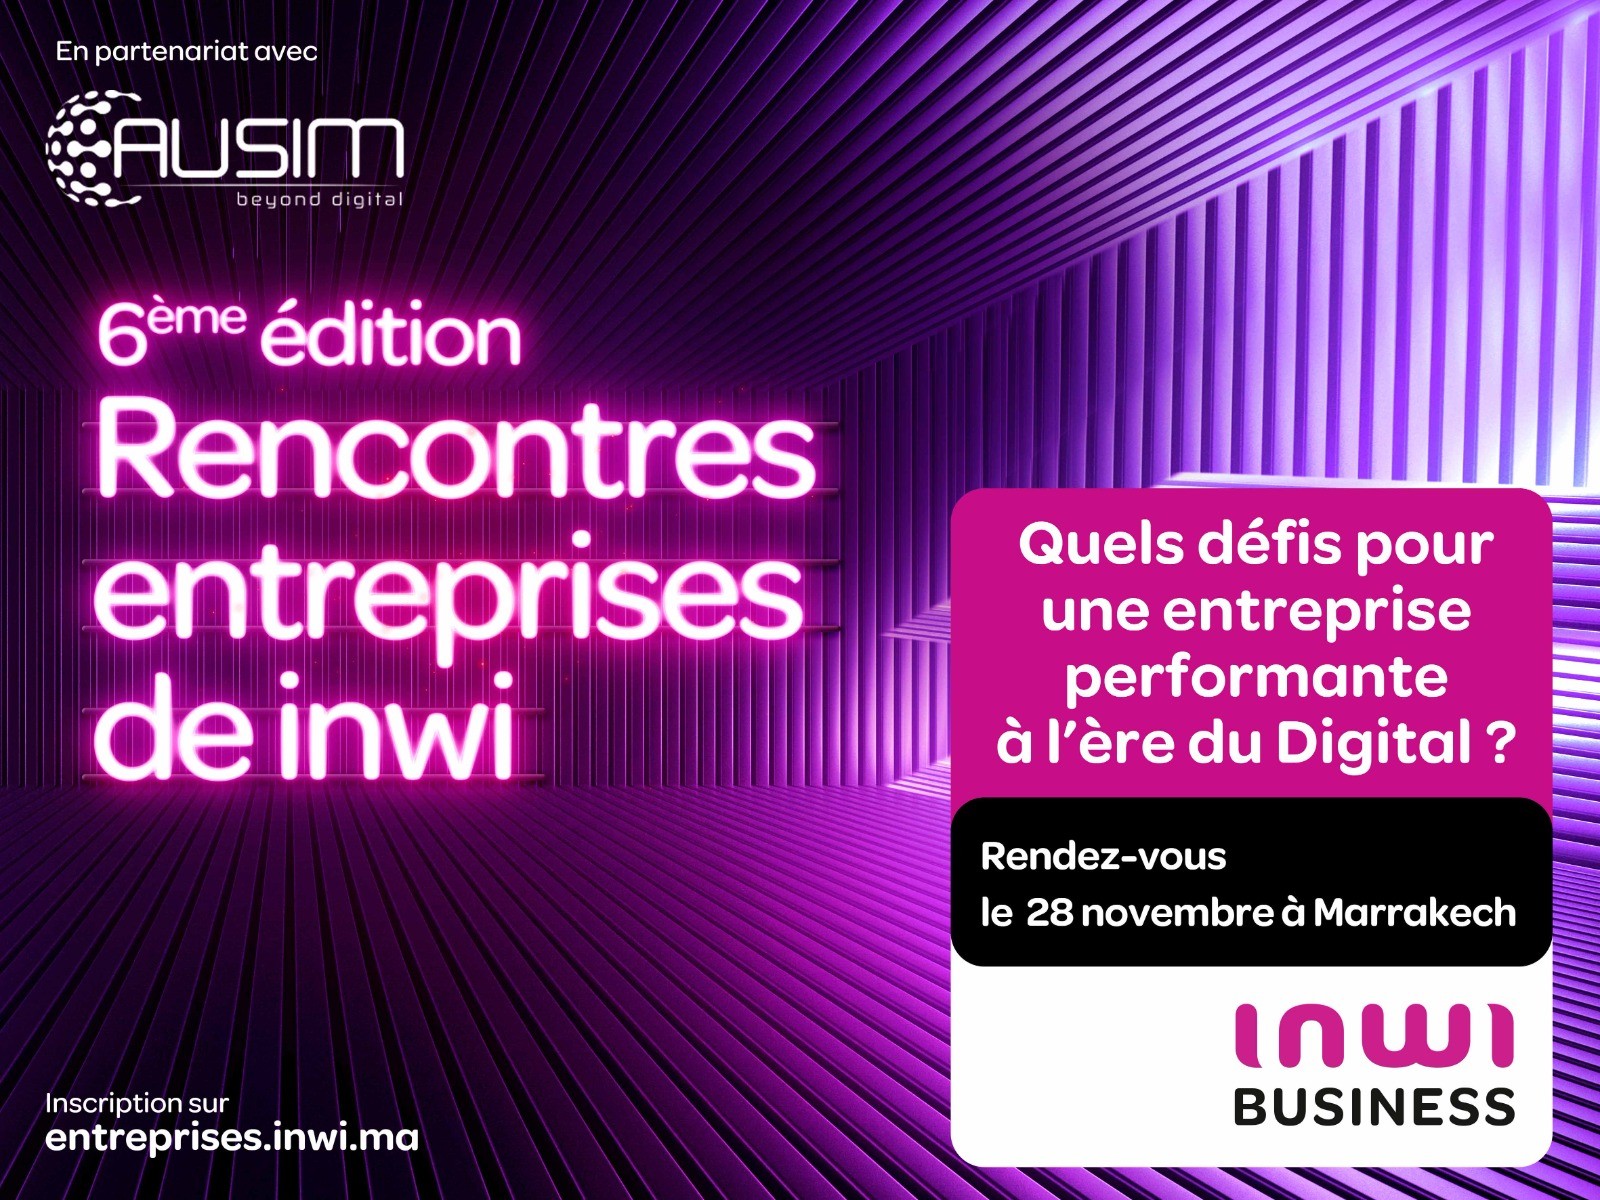 The 6th edition of “Rencontres Entreprises de inwi